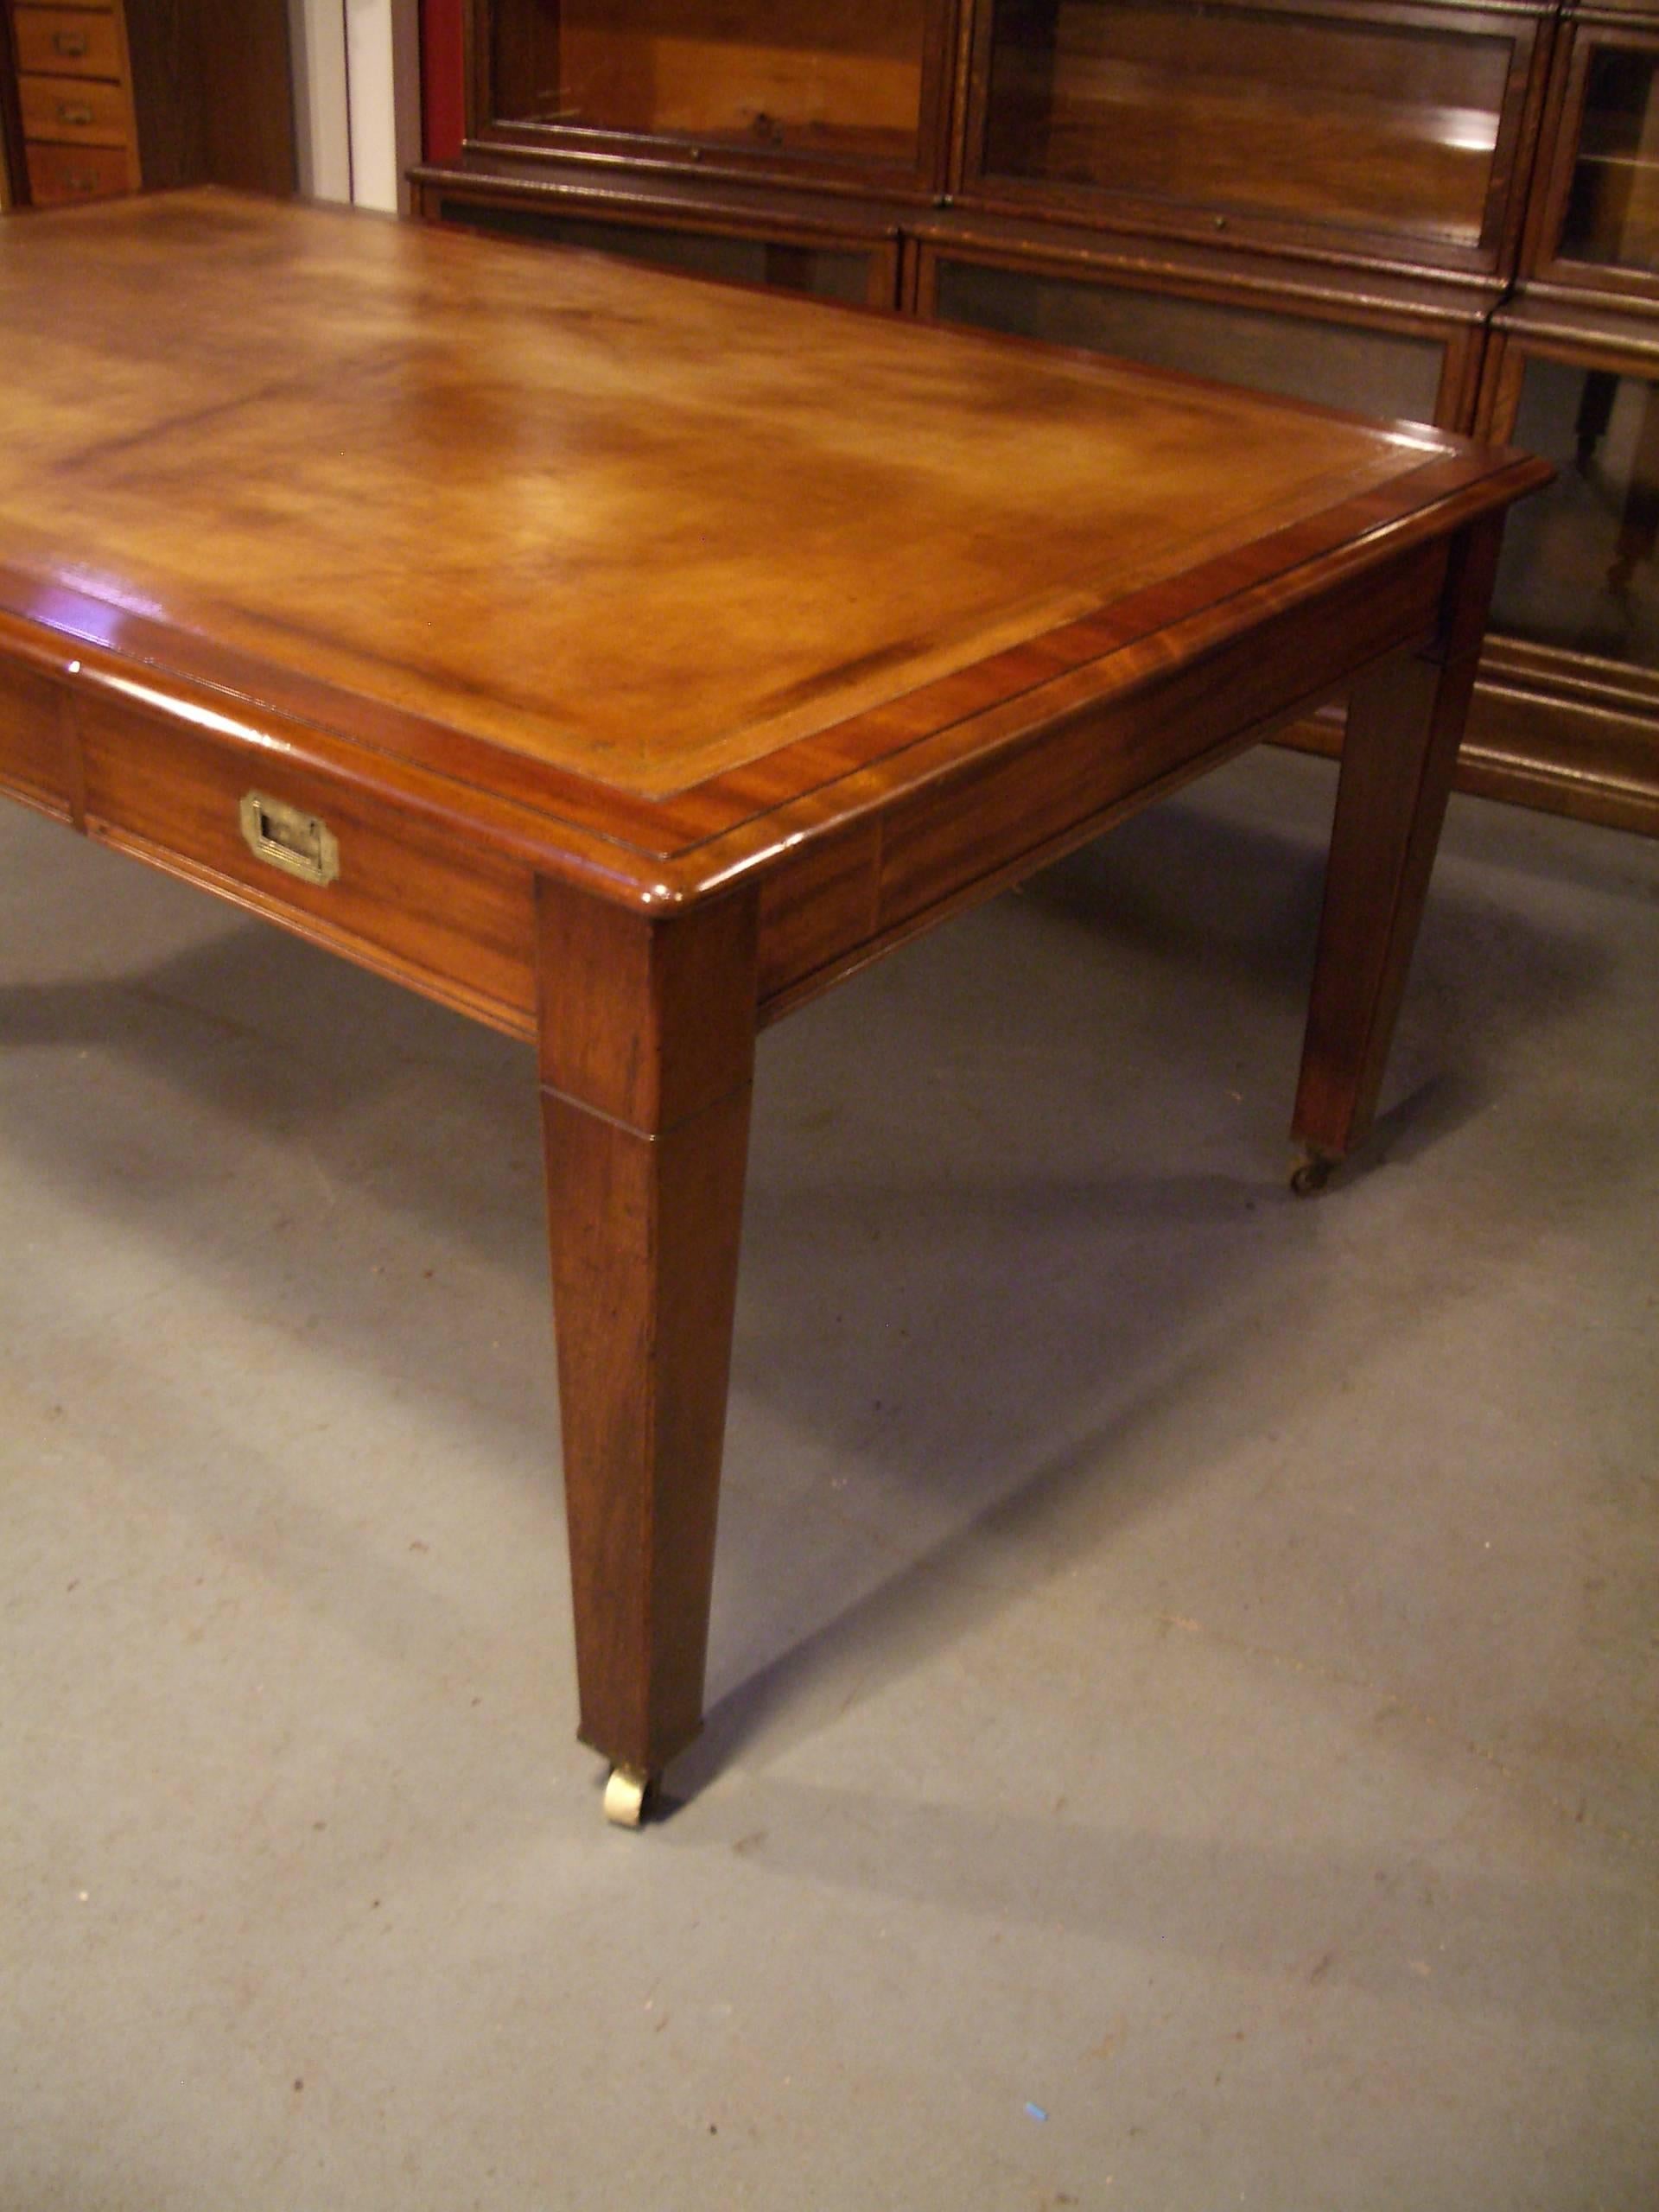 Beautiful big antique mahogany writing desk. Beautiful warm mahogany color with a tan leather (hide) top. Perfect simple look with the military handles and square tapered leg with big wheels. On both sides the table has 3 drawers. Very useful as a